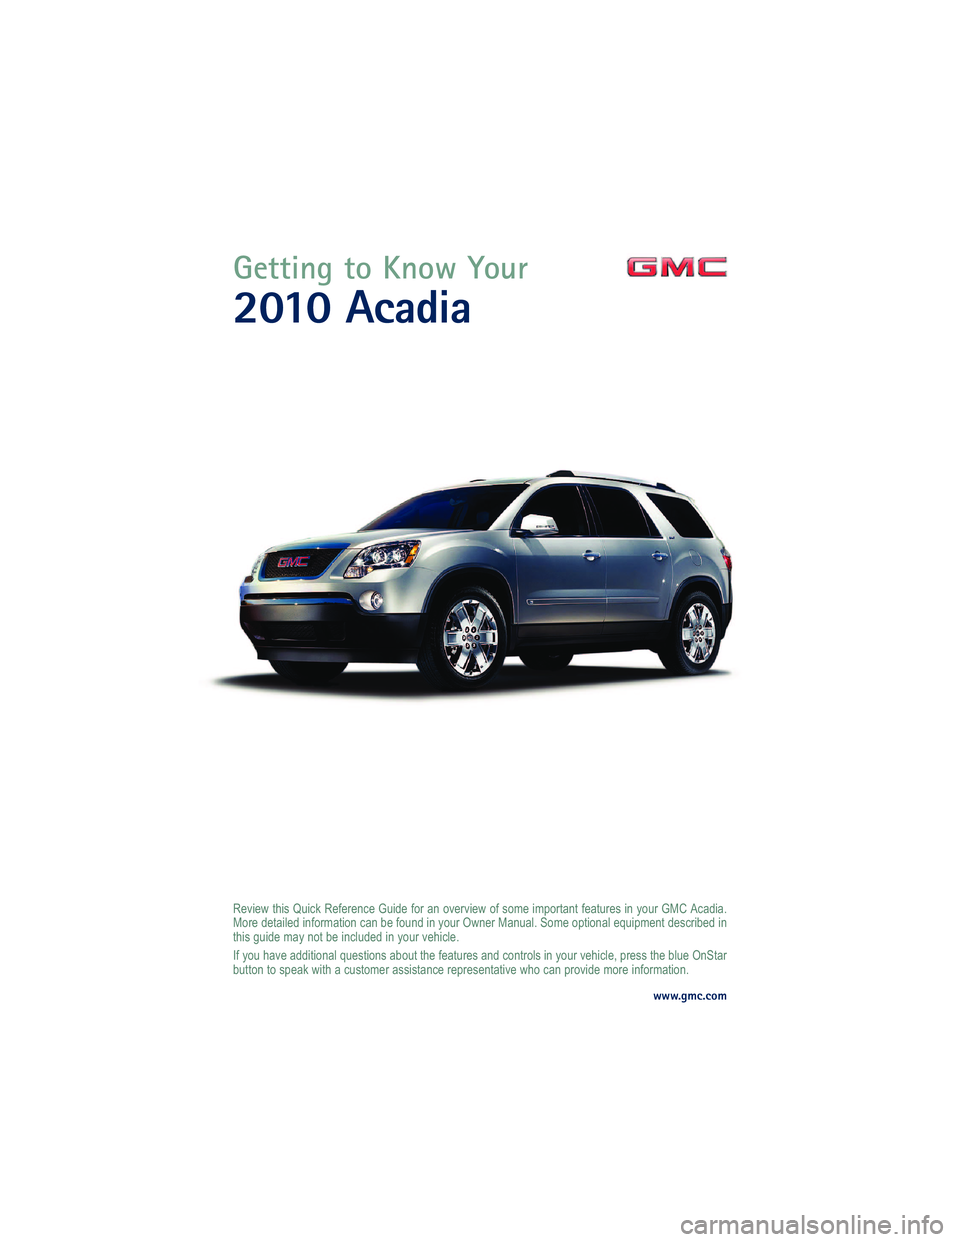 GMC ACADIA 2010  Get To Know Guide 
  ! "  "	  "
    "  " " "      ! " "    "  "    " "$  "  "   
  "   "    "  "
 " " "$   "